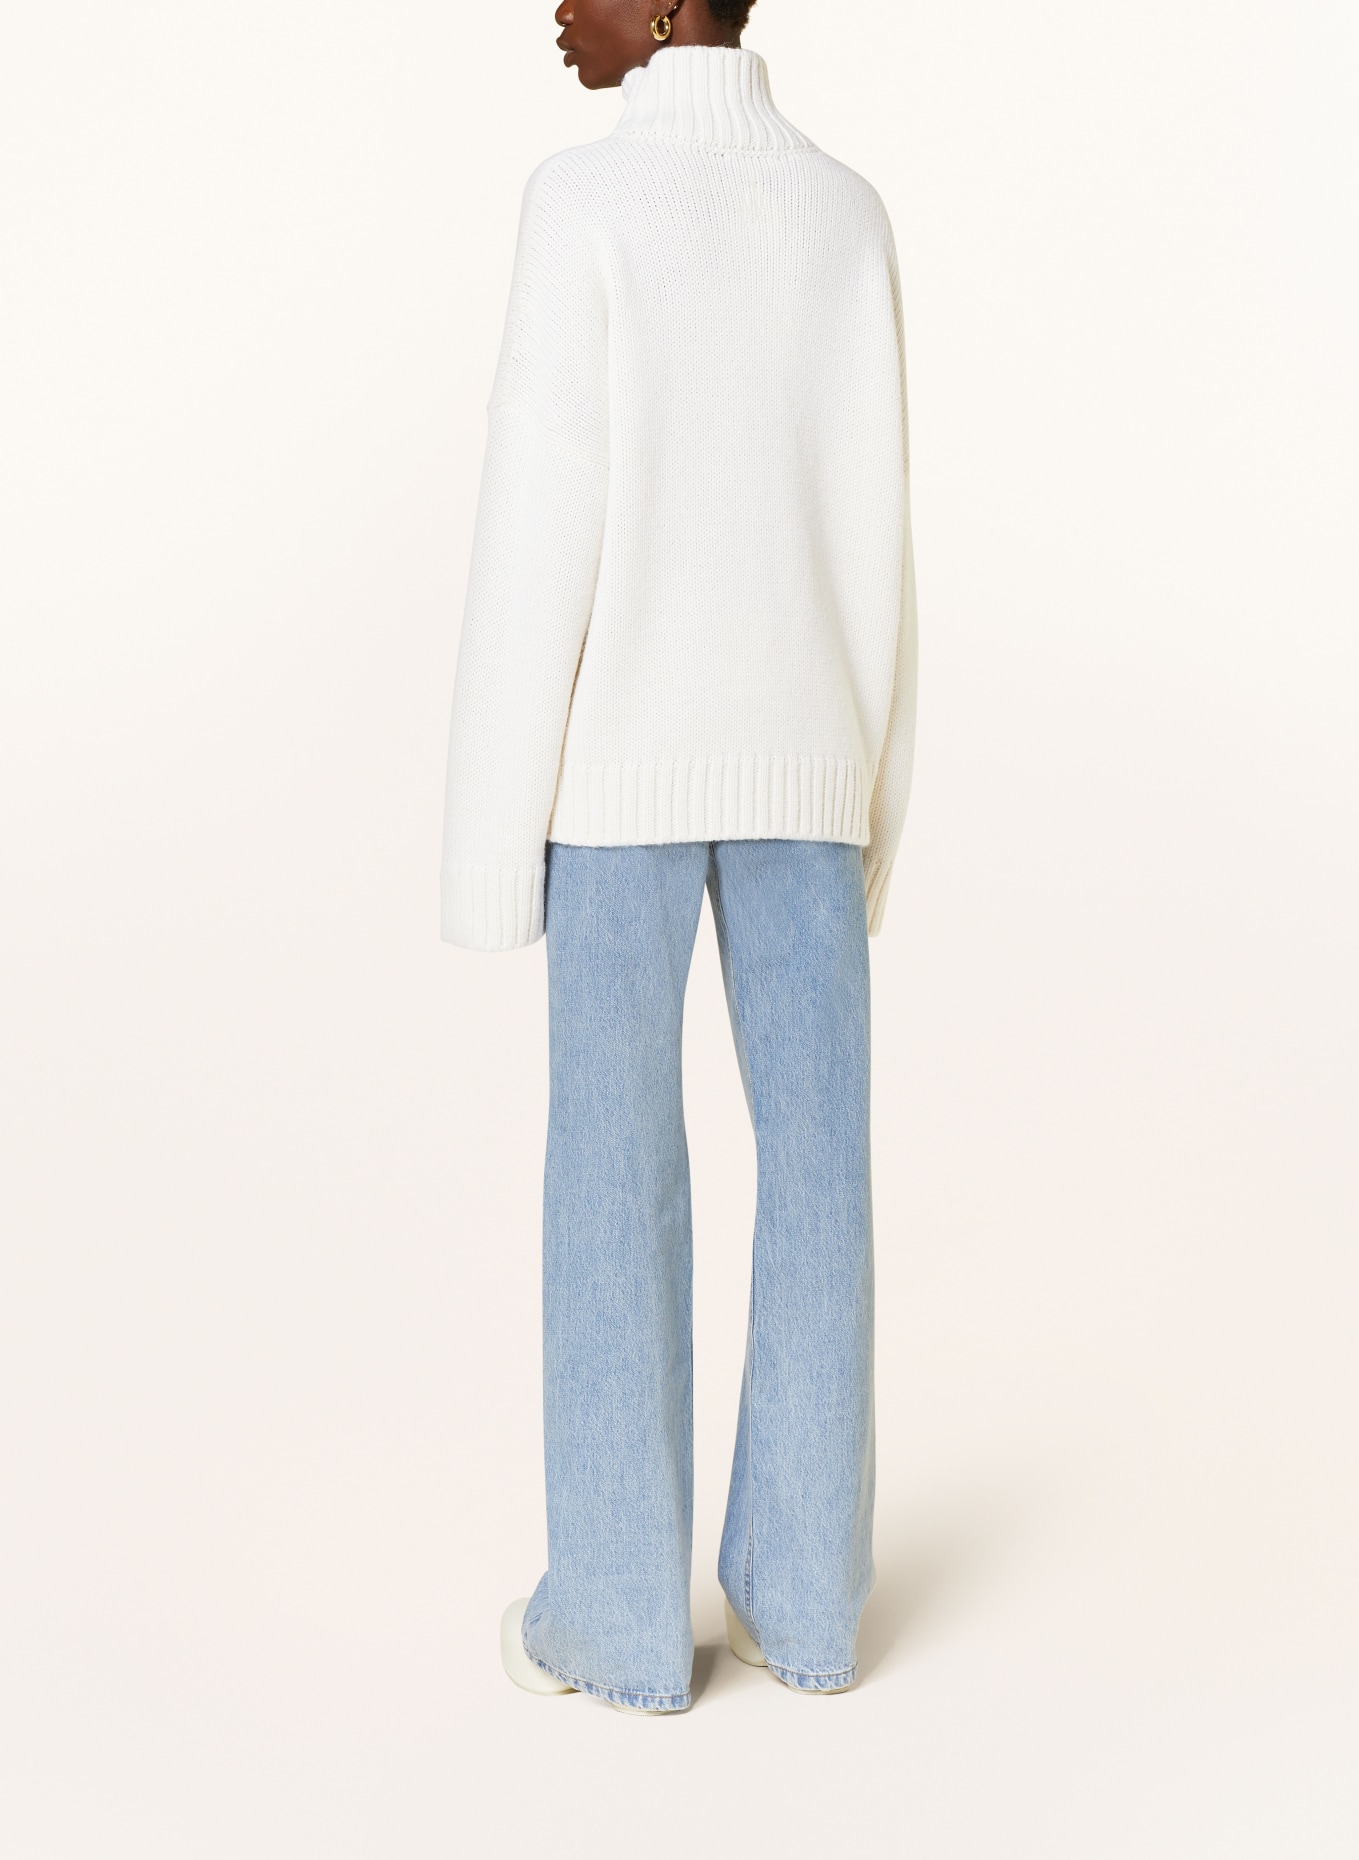 JW ANDERSON Sweater with alpaca, Color: CREAM/ PINK (Image 3)